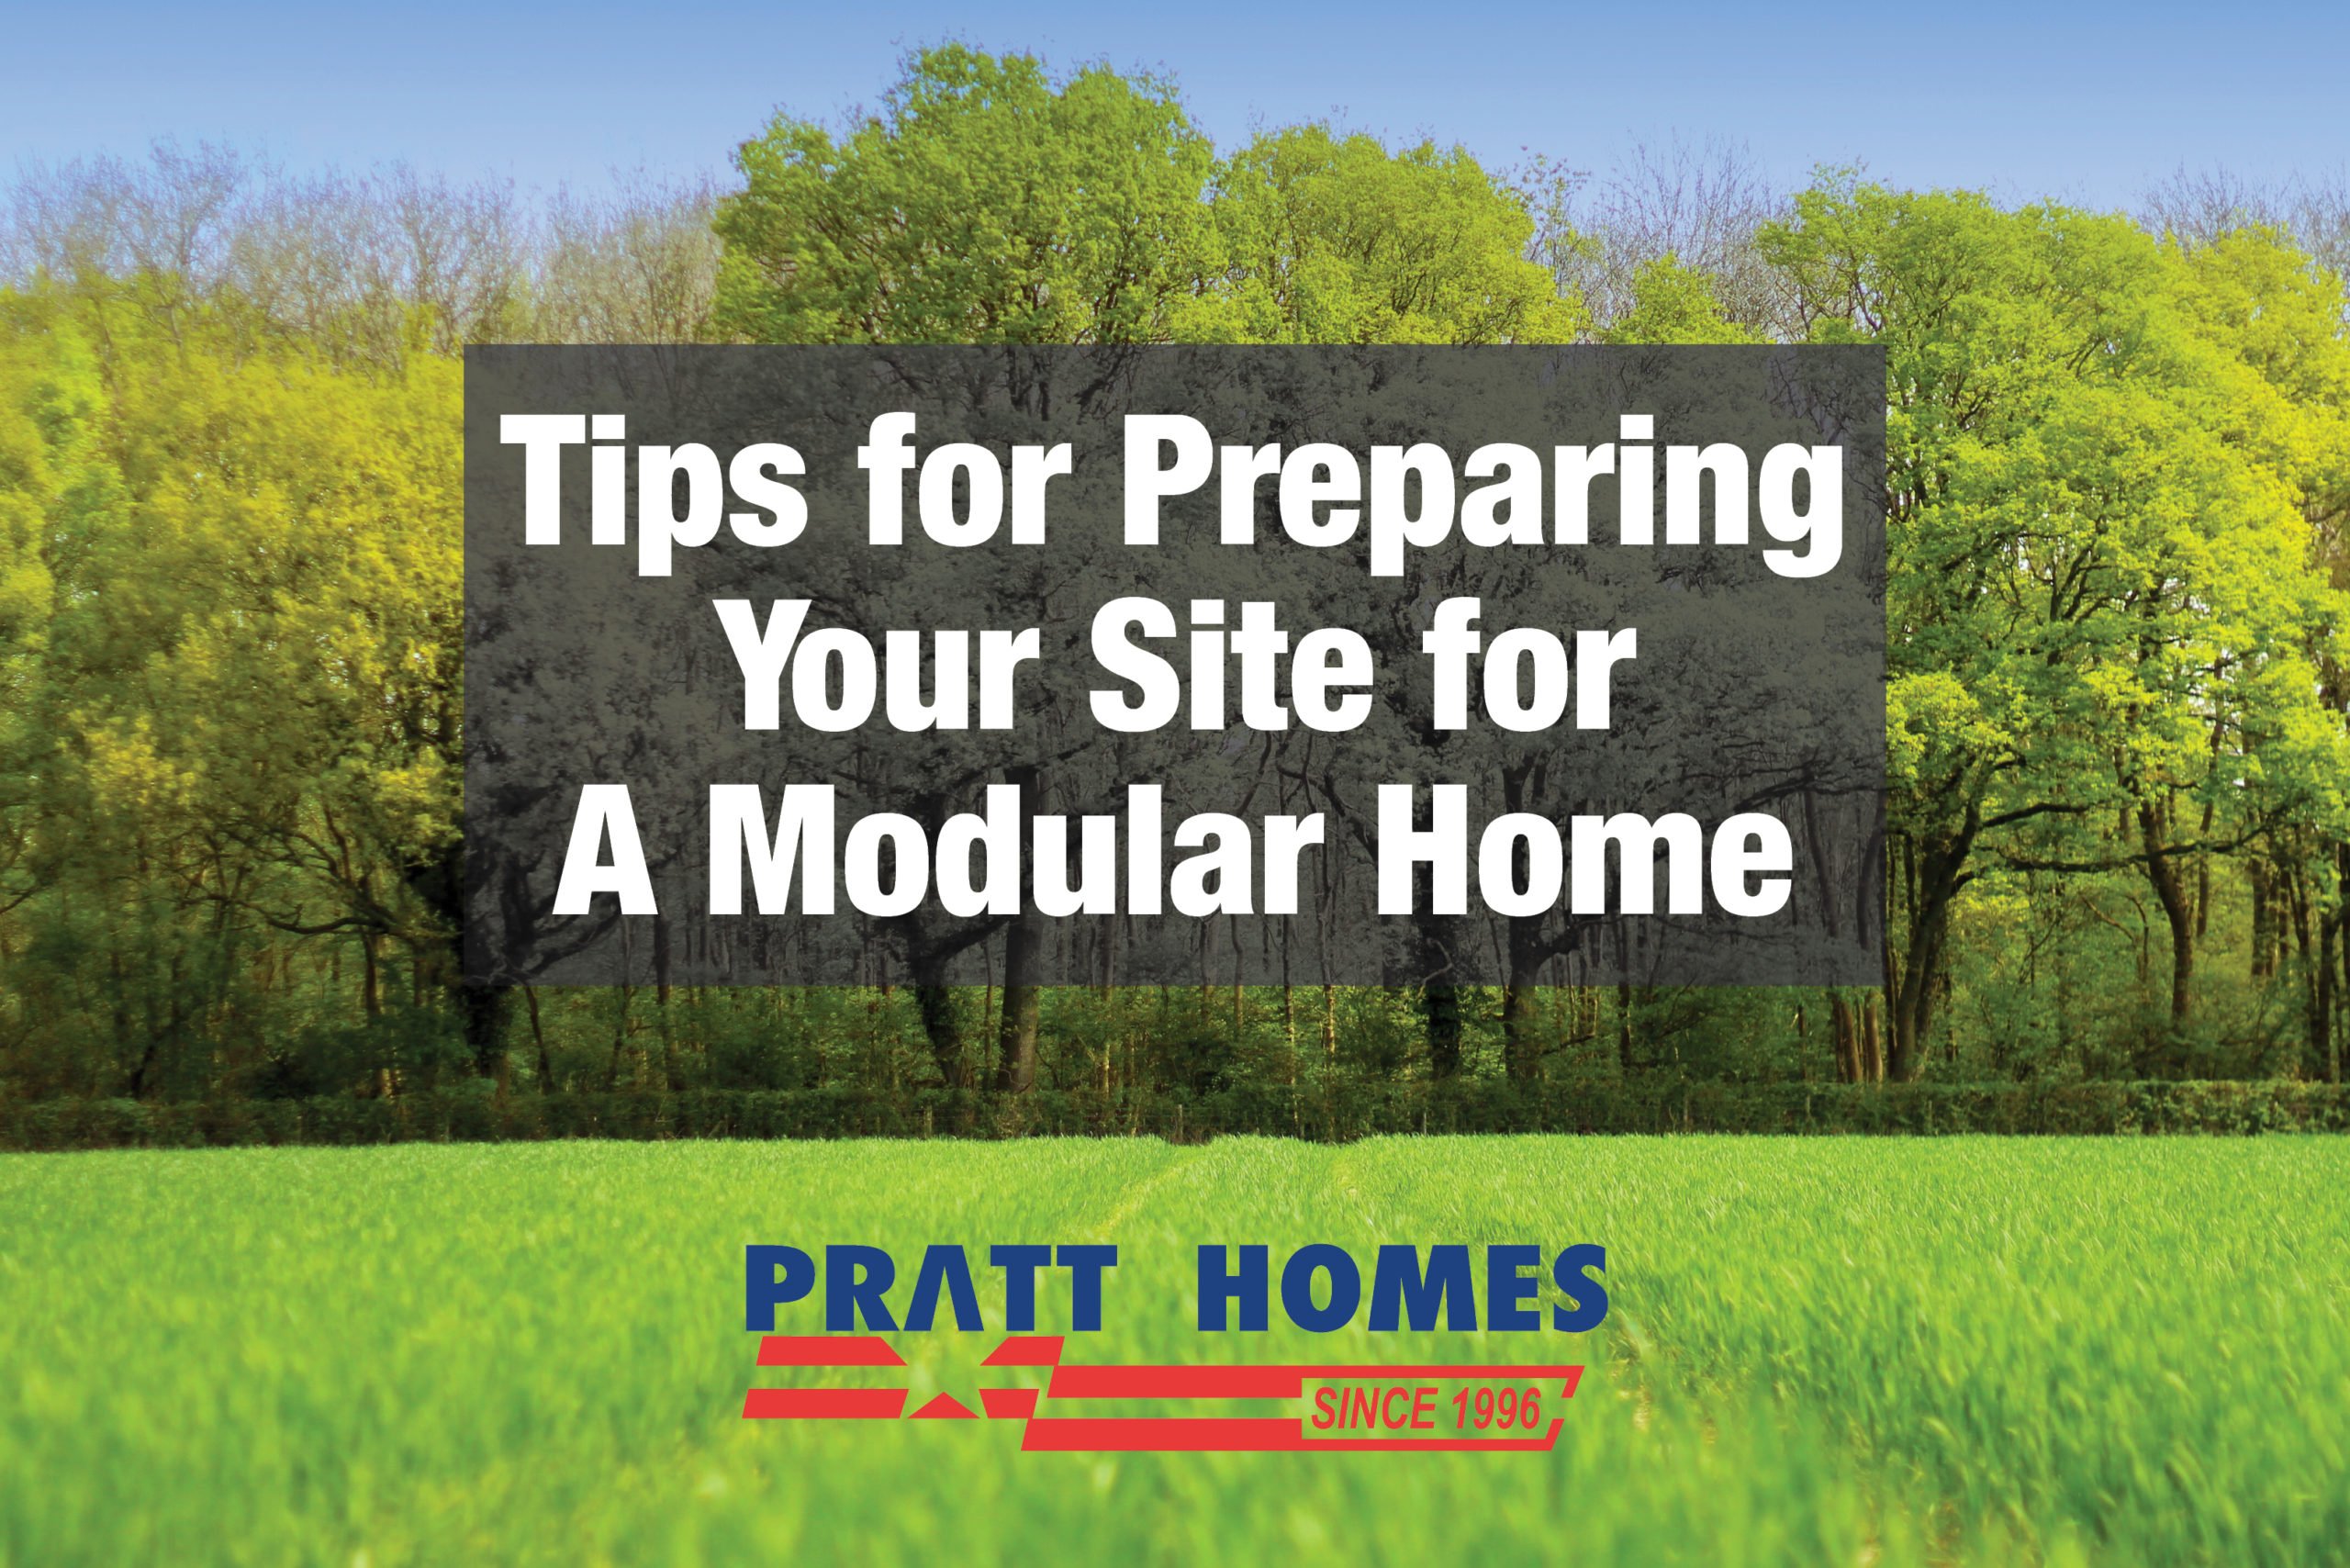 5 Tips for Preparing Your Site for A Modular Home